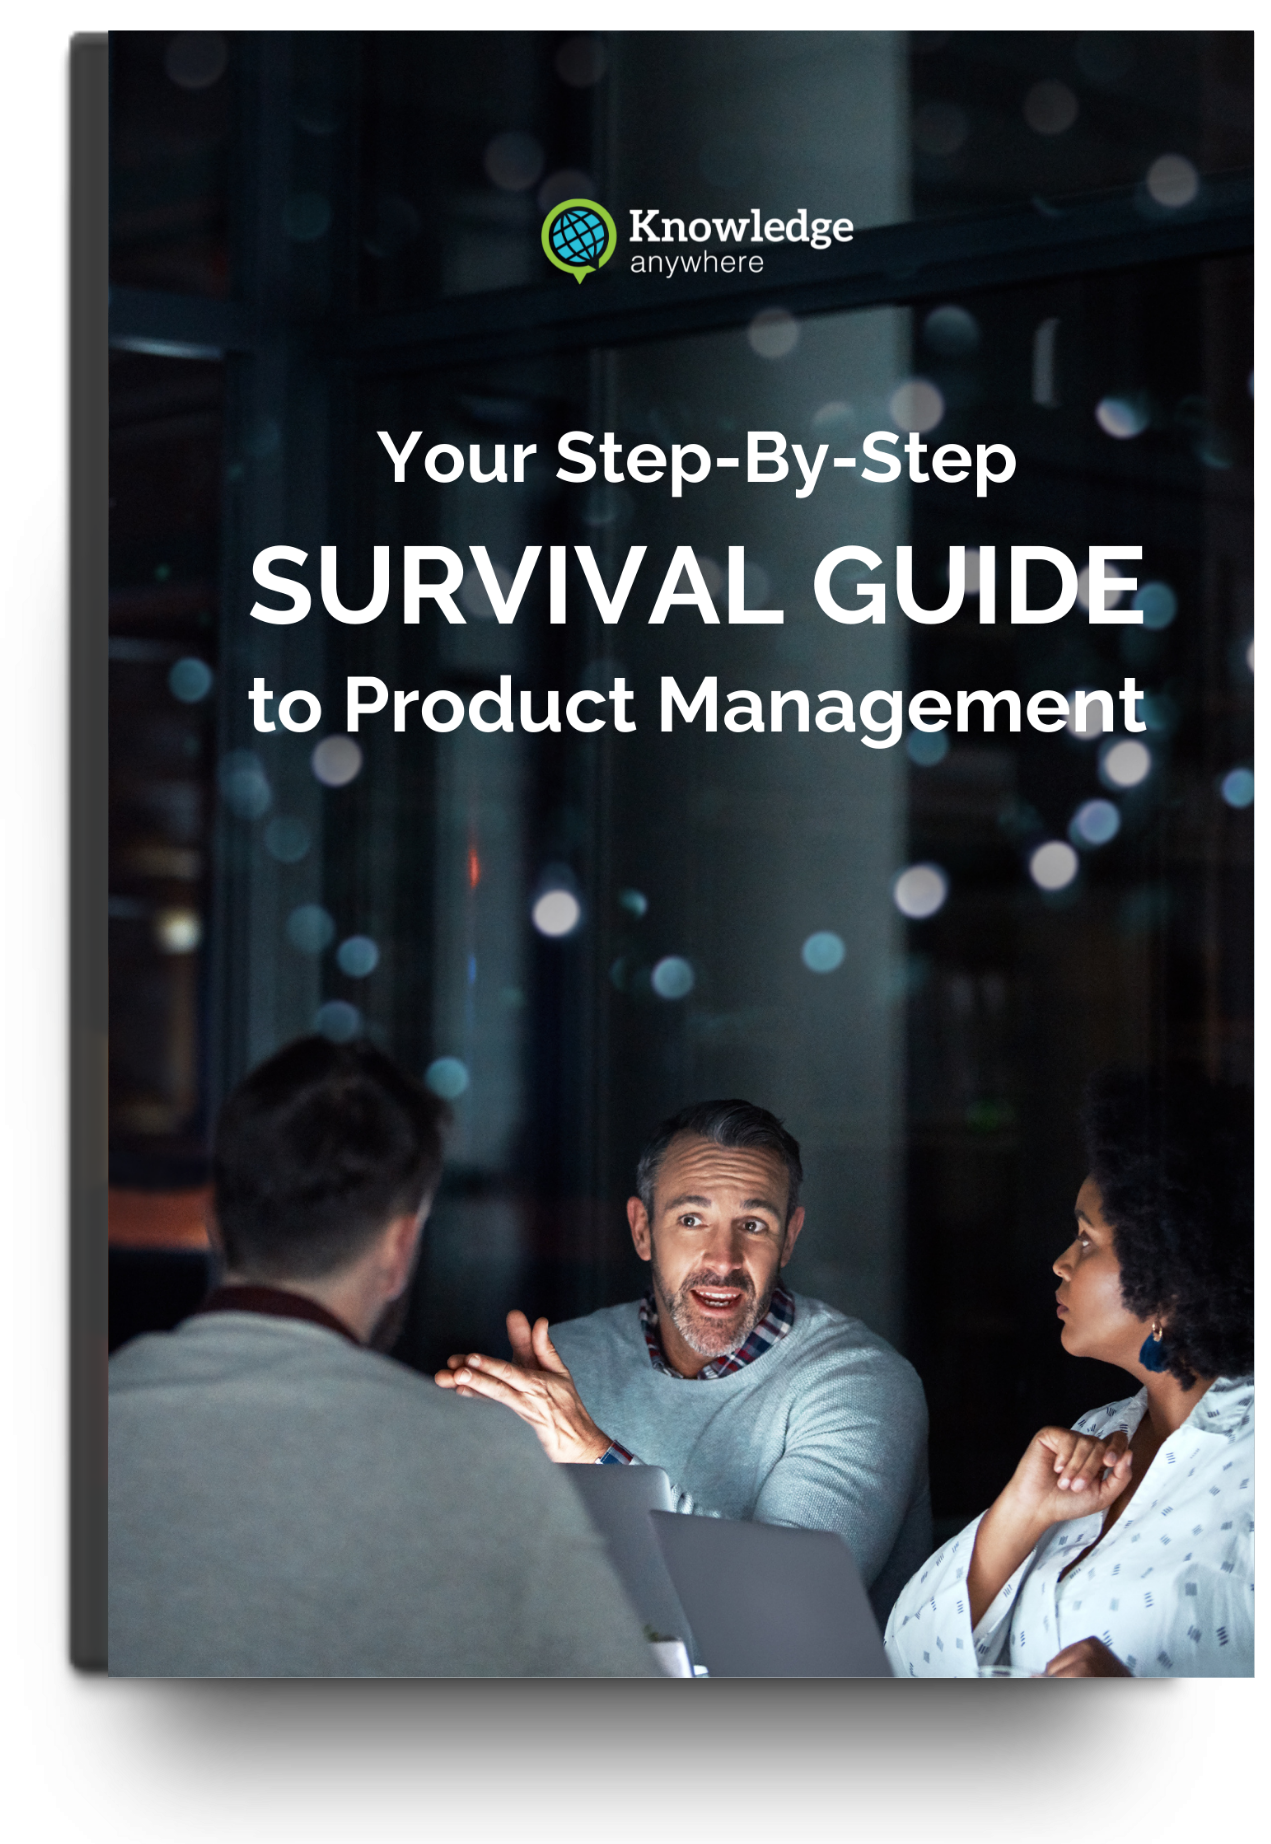 Your Survival Guide to Product Management Training